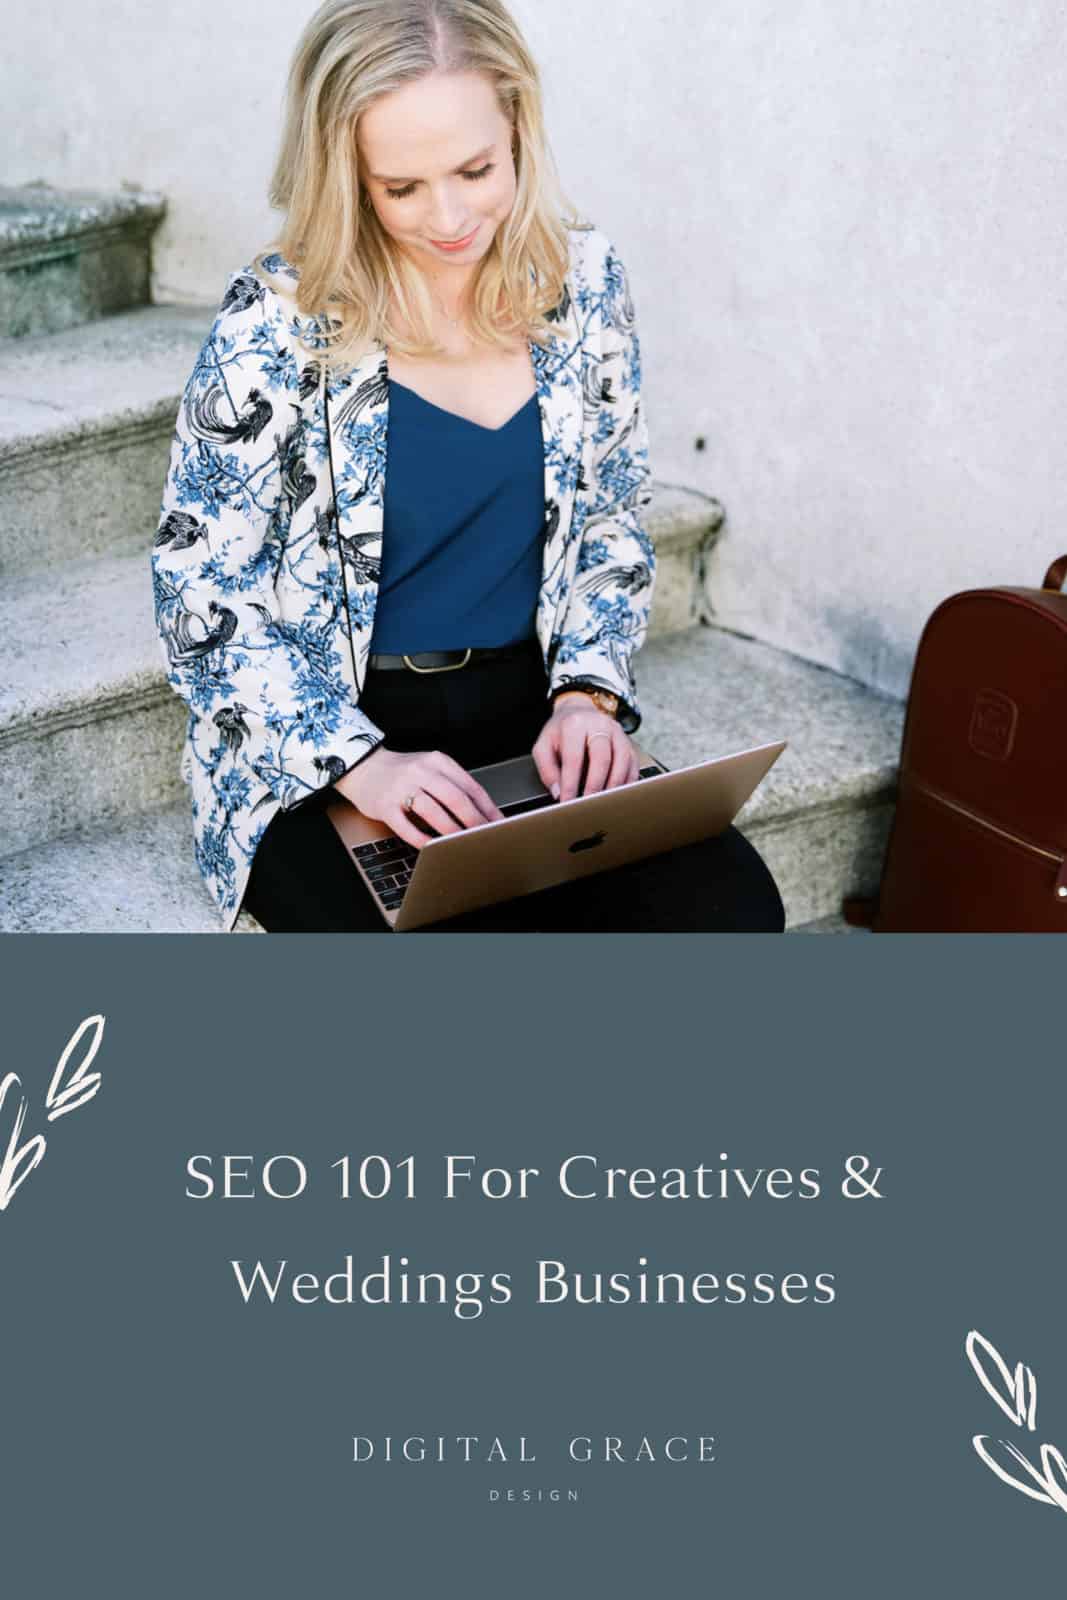 SEO 101 for Creative and Wedding Businesses